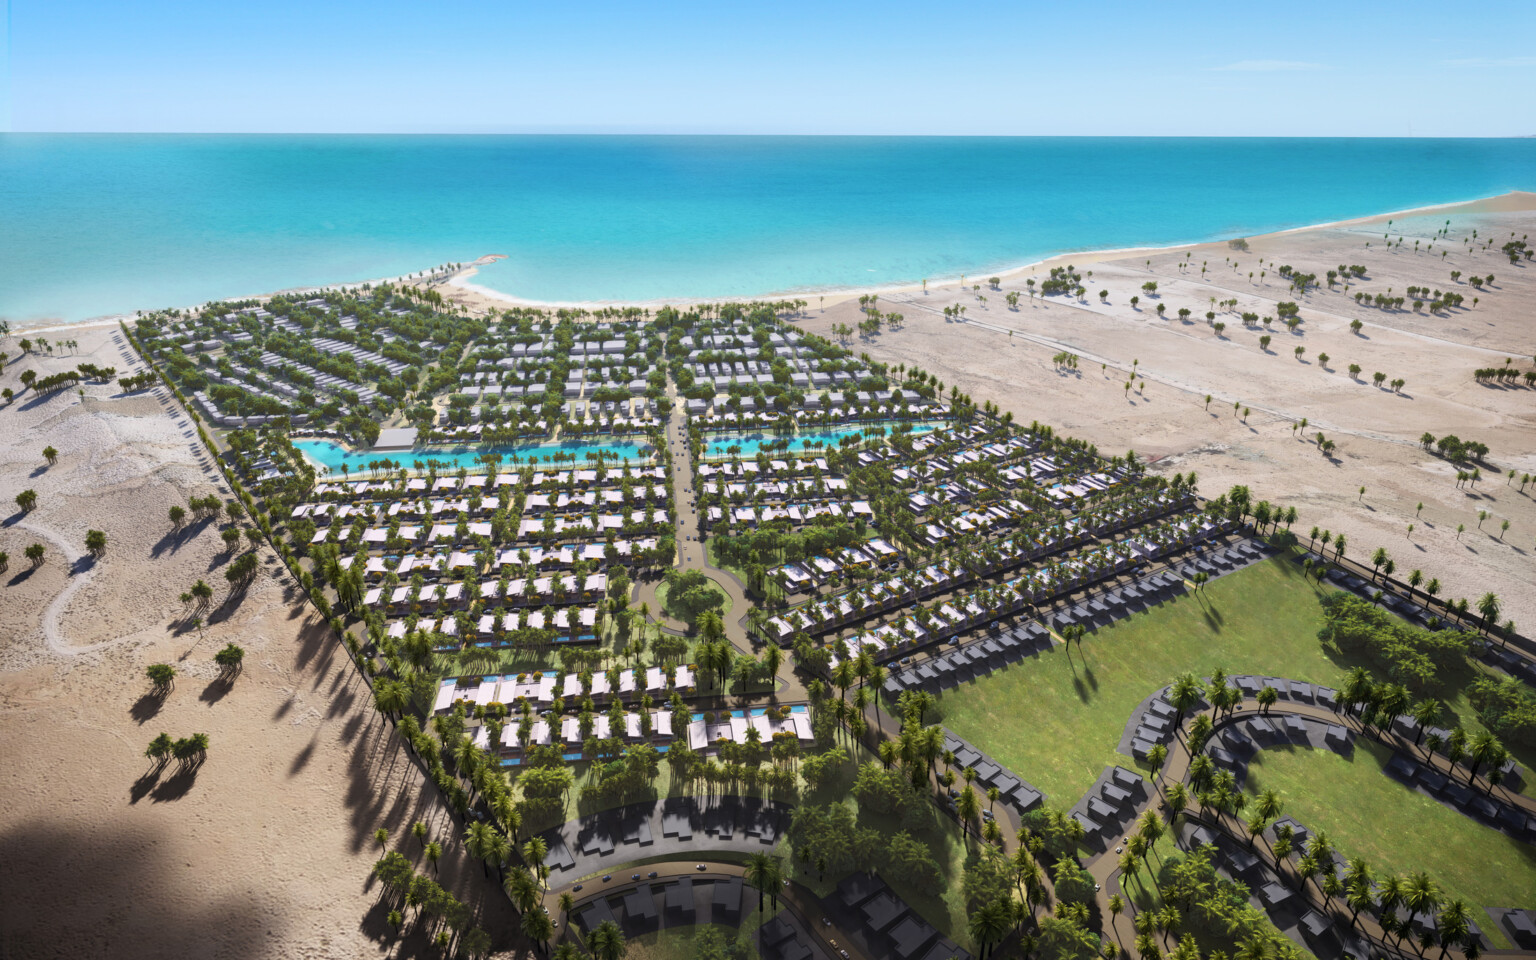 An aerial view of a coastal resort with rows of beachfront residences, palm trees, swimming pools, and a beachfront.